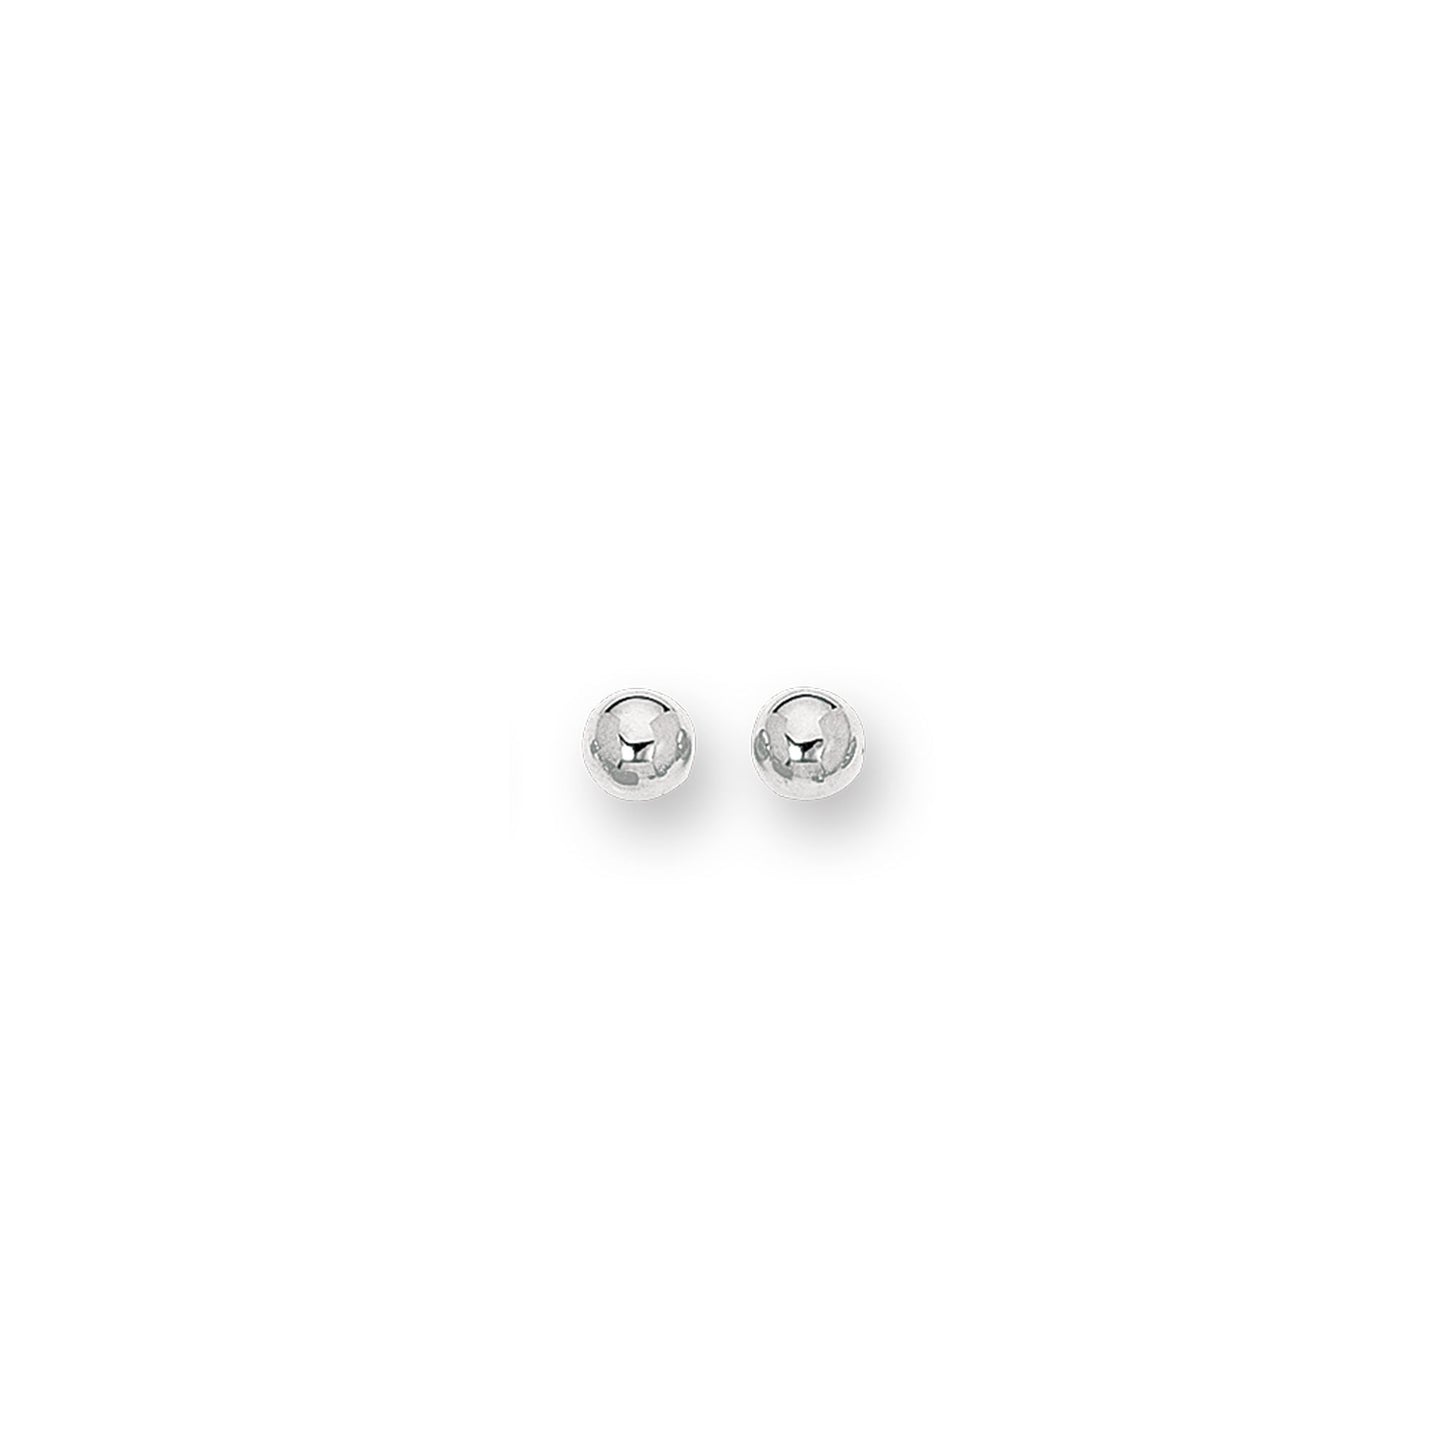 14K Gold Polished Ball Stud Earring with Push Back Clasp